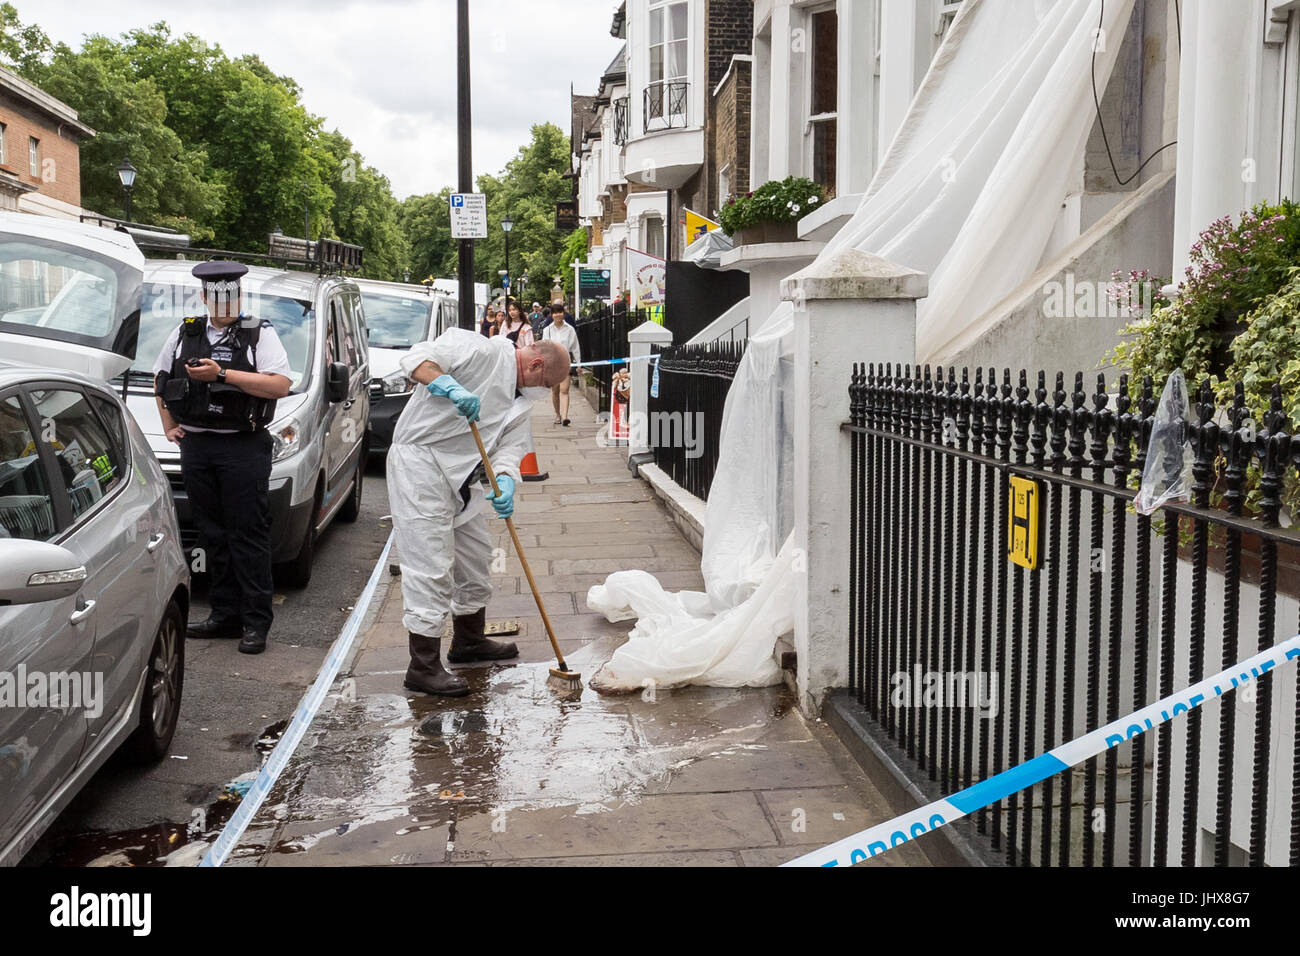 London, UK. 16th July, 2017. Greenwich murder investigation. Police forensic teams clean up after investigations at the scene of the crime. Danny Pearce, 31, was stabbed to death by two men on a moped near Greenwich Park in the early hours of Saturday who ordered him to hand over his mobile phone. The victim was fatally wounded during a clash in which shots were also fired the Metropolitan Police have said.© Guy Corbishley/Alamy Live News Stock Photo